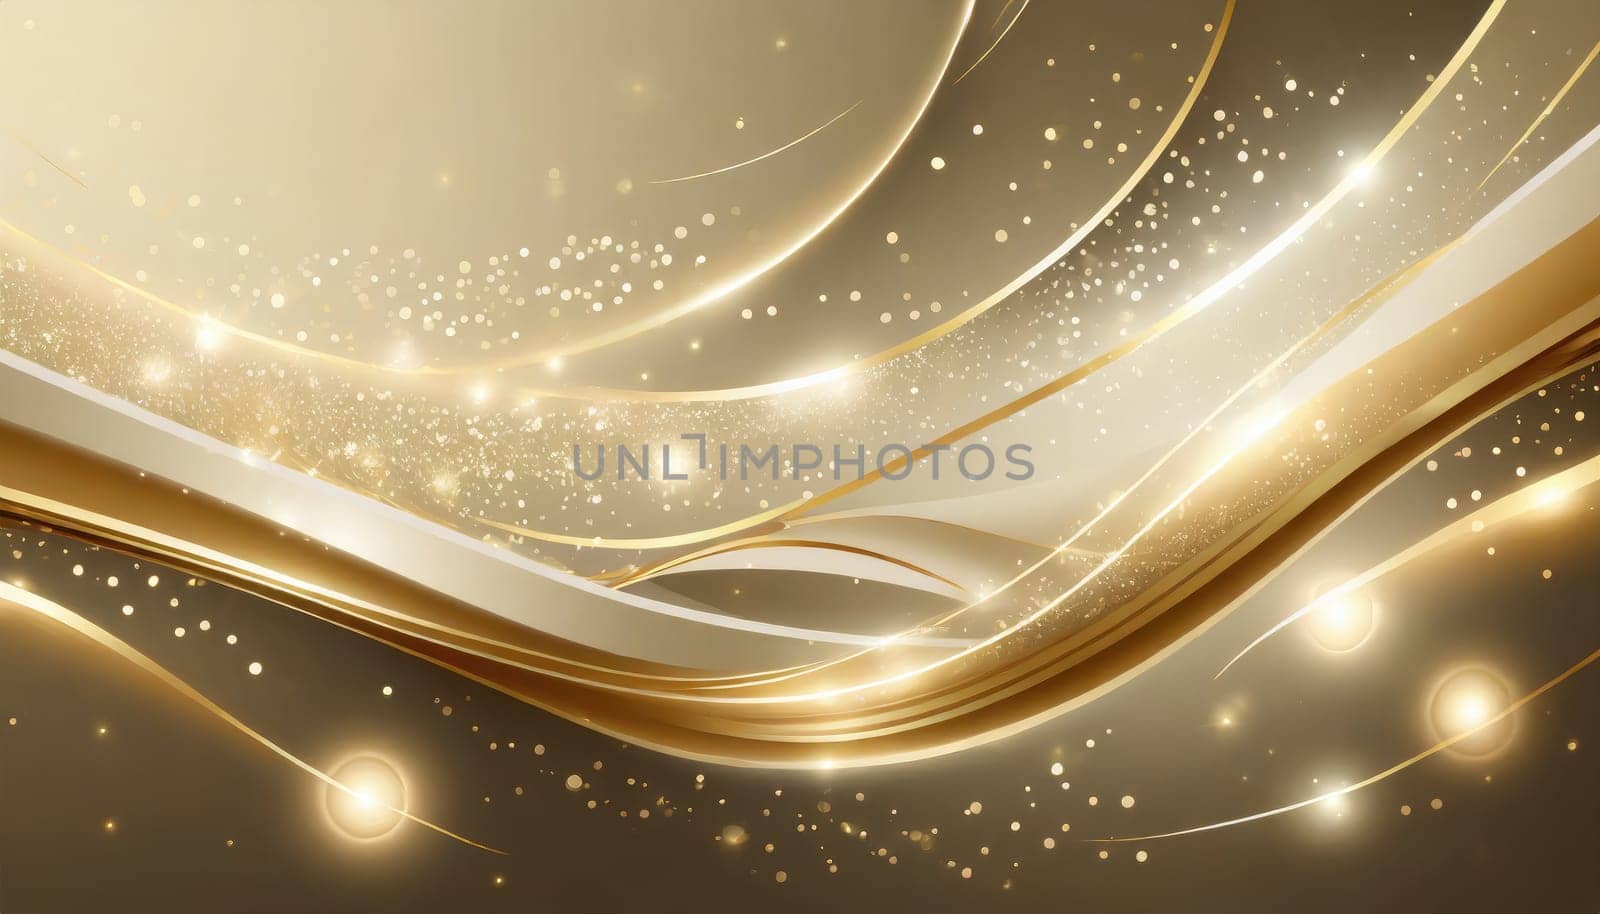 Luxury cream color background with golden line elements and curv by PeaceYAY